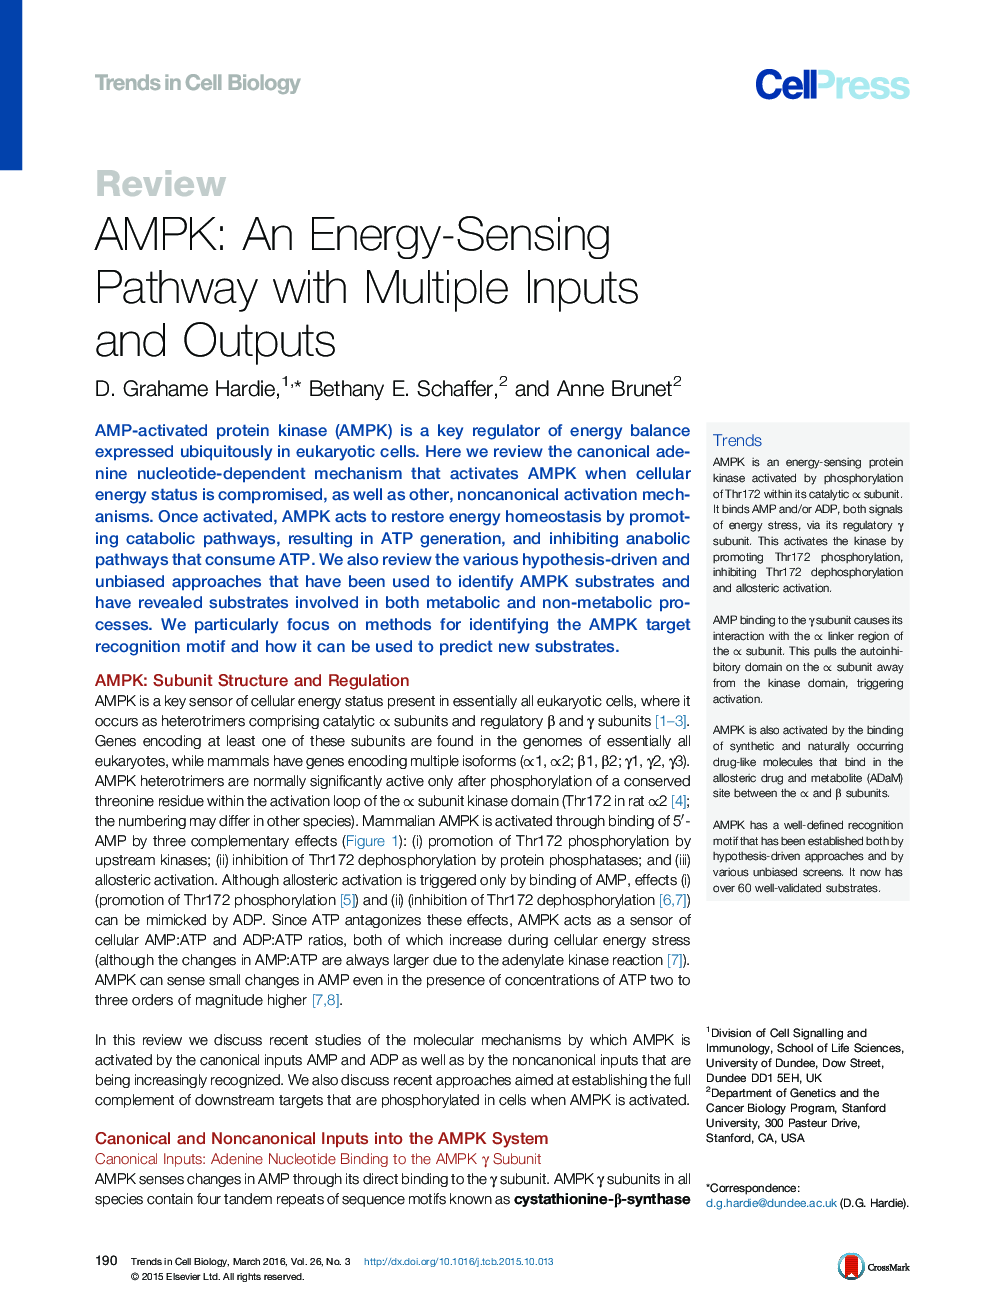 AMPK: An Energy-Sensing Pathway with Multiple Inputs and Outputs